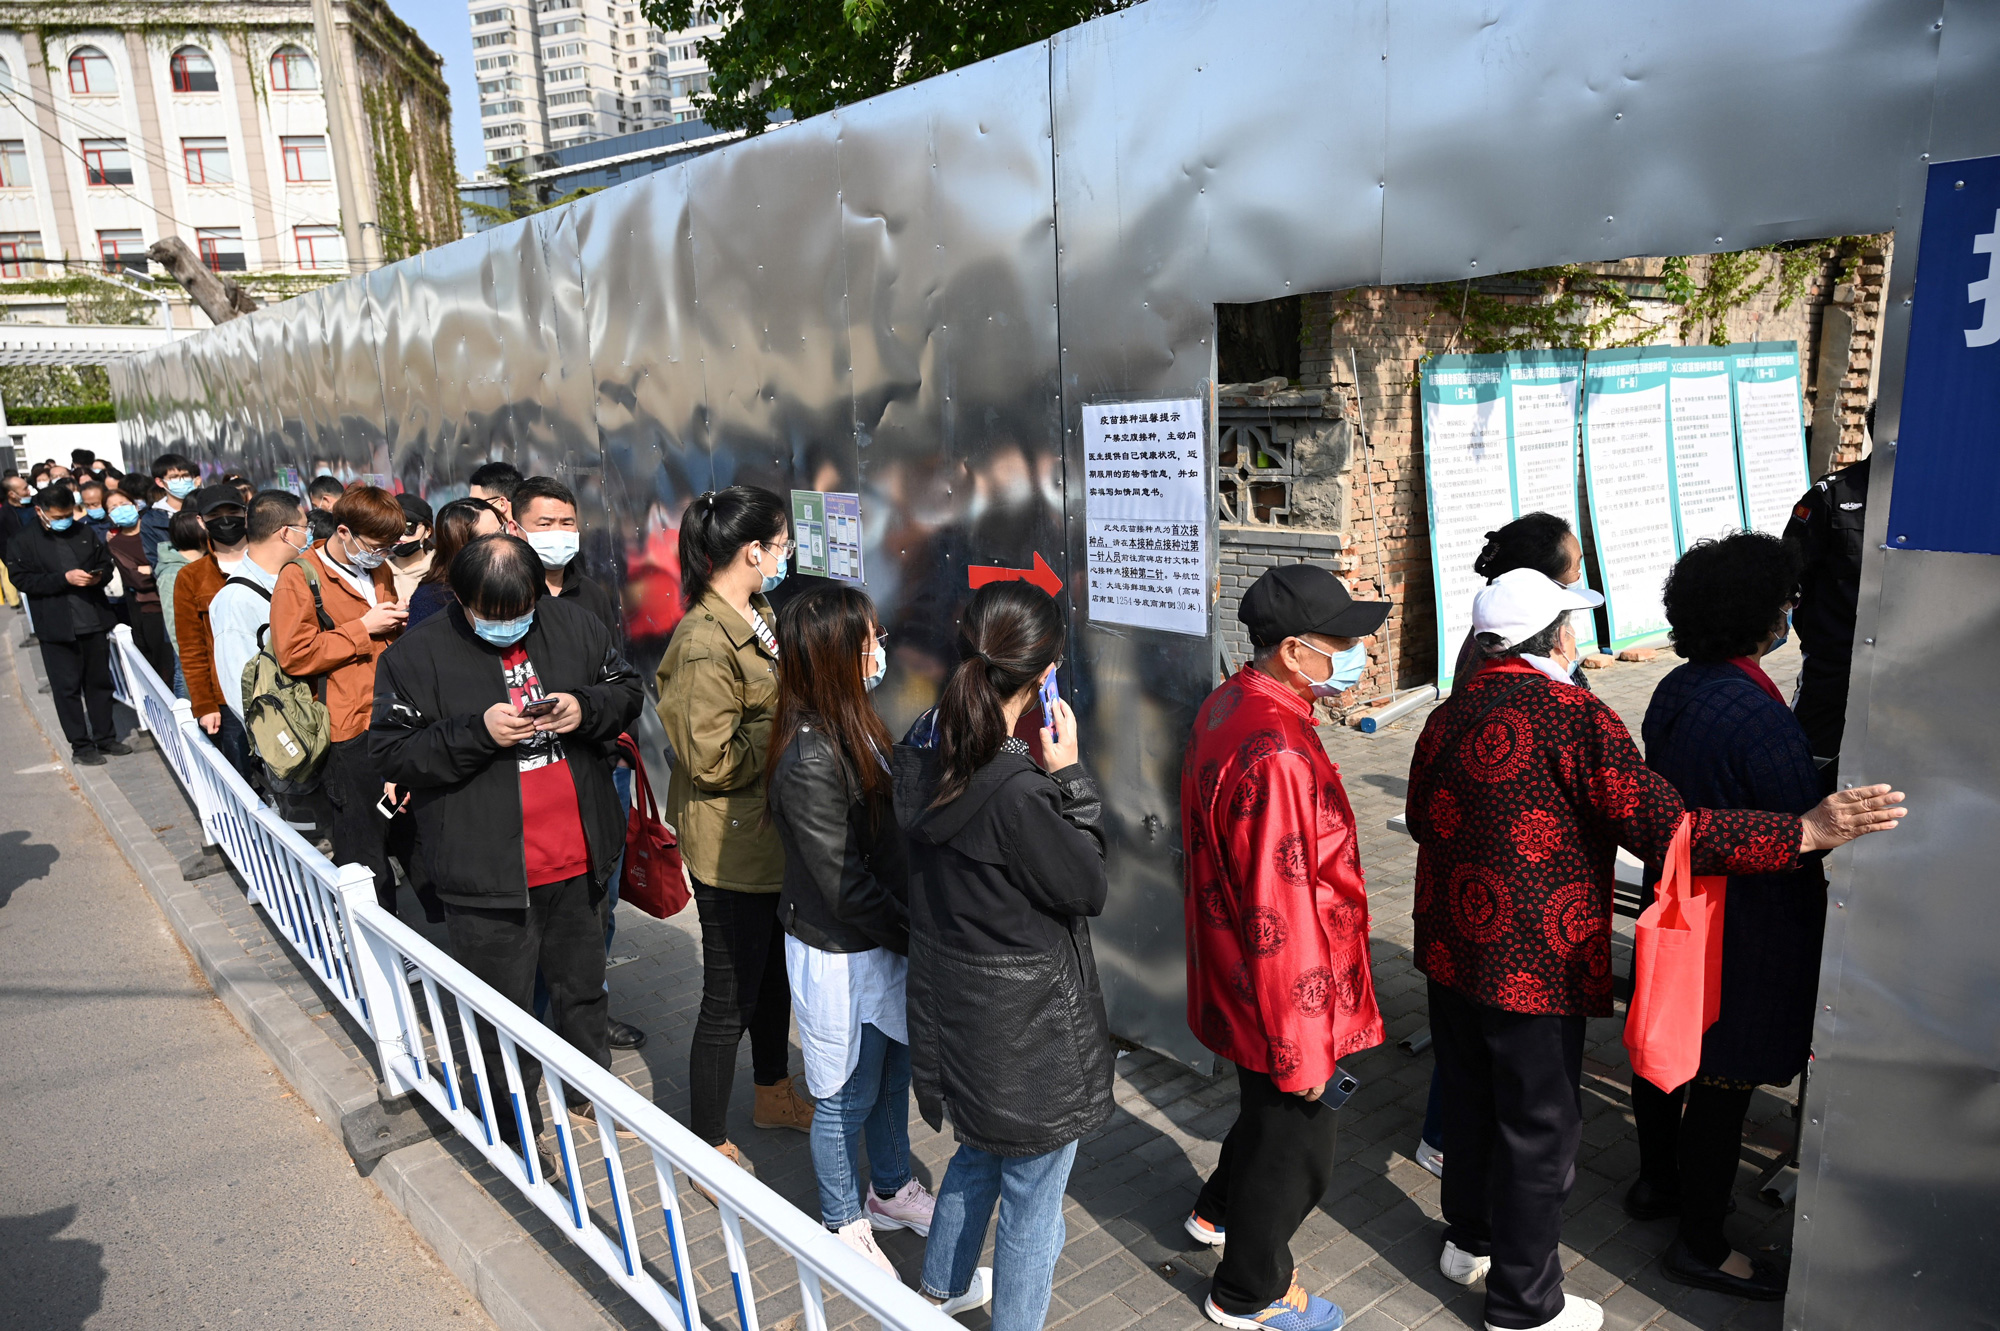 People line up for Covid-19 vaccines in Beijing on April 8.